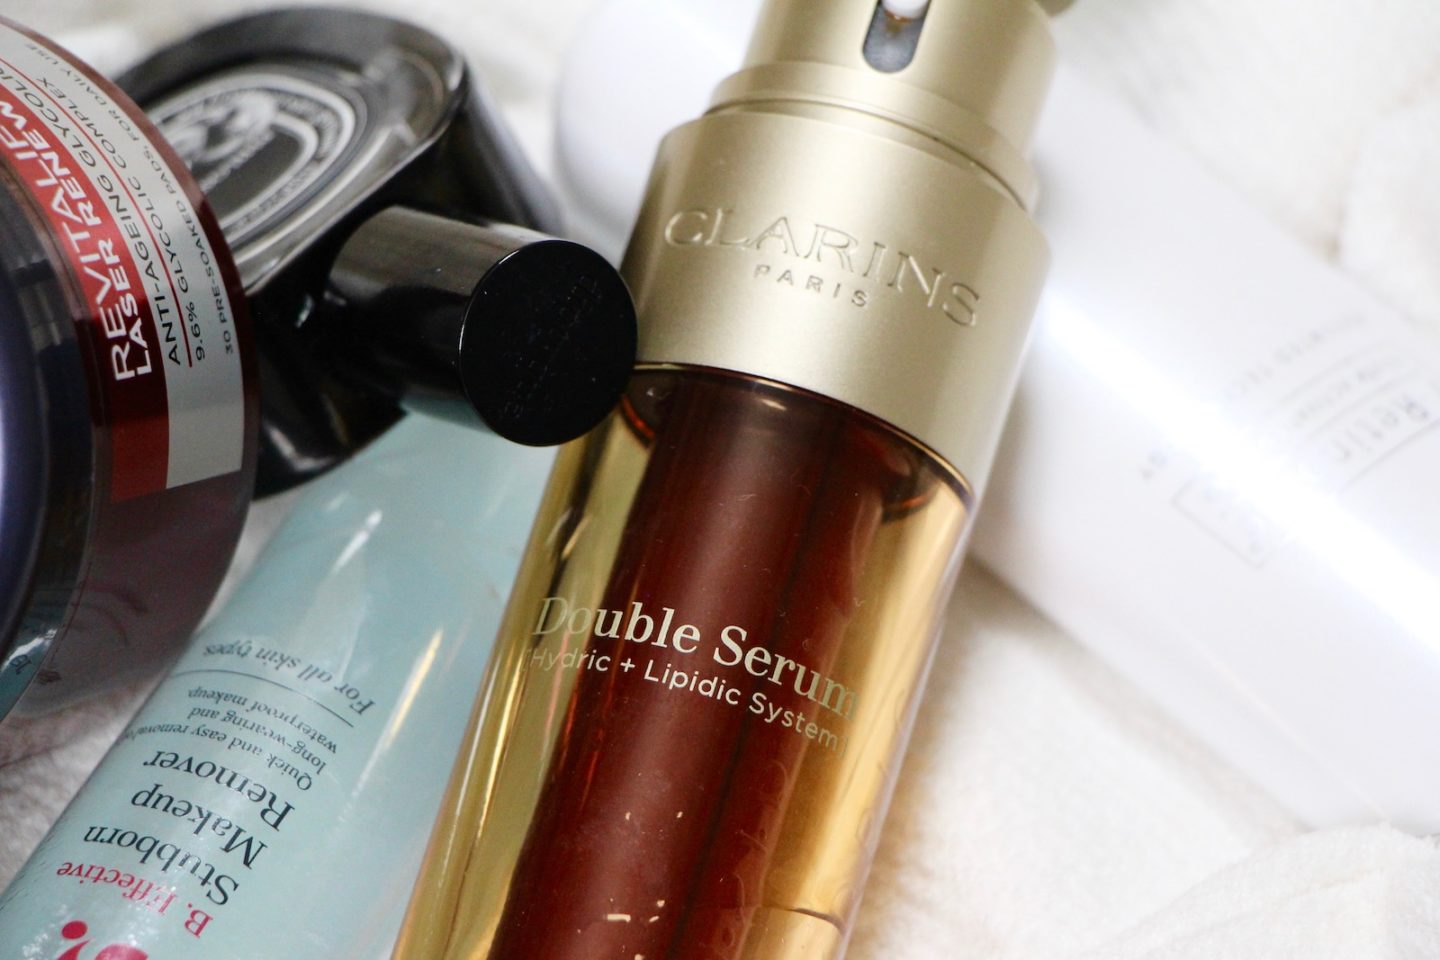 clarins double serum review